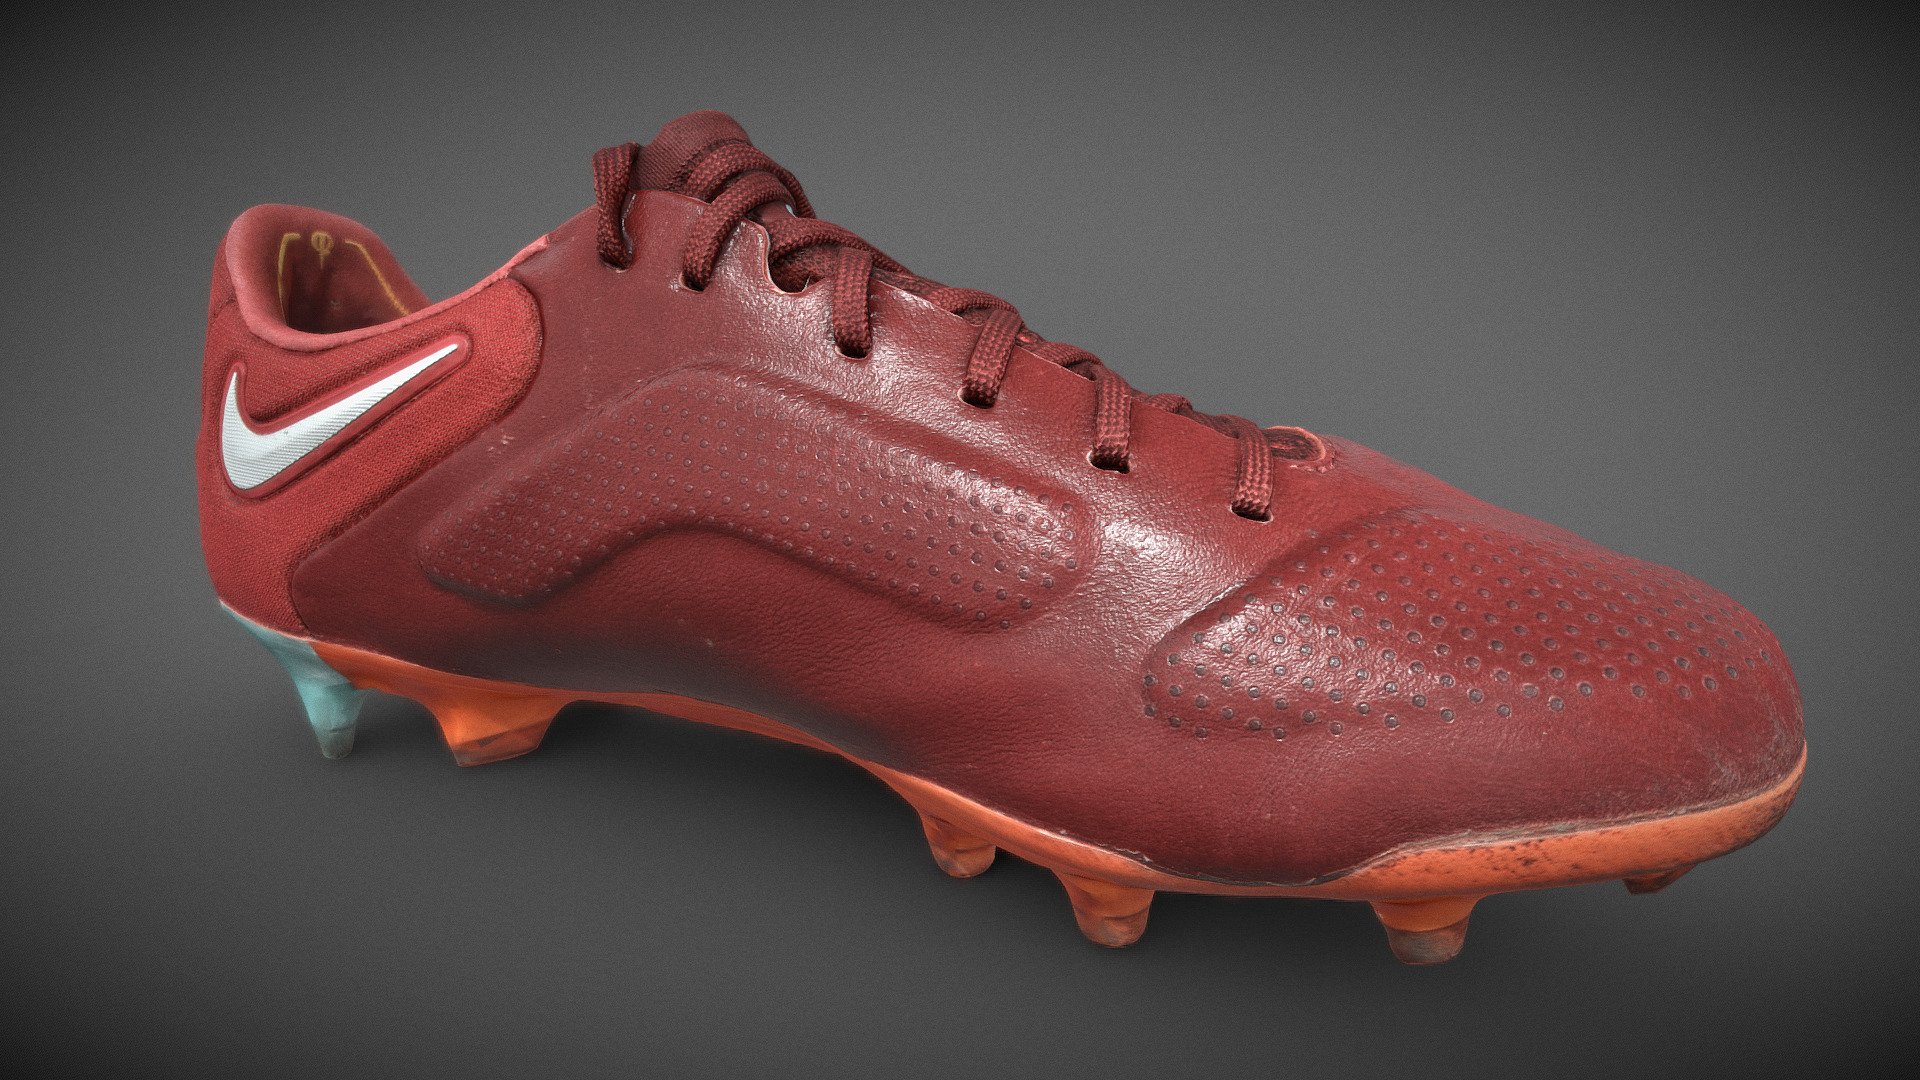 Nike Tiempo Football Shoes Photogrammetry scan for the Nike Never Settle ad campain.
250k triangles model with 8K textures 3d model